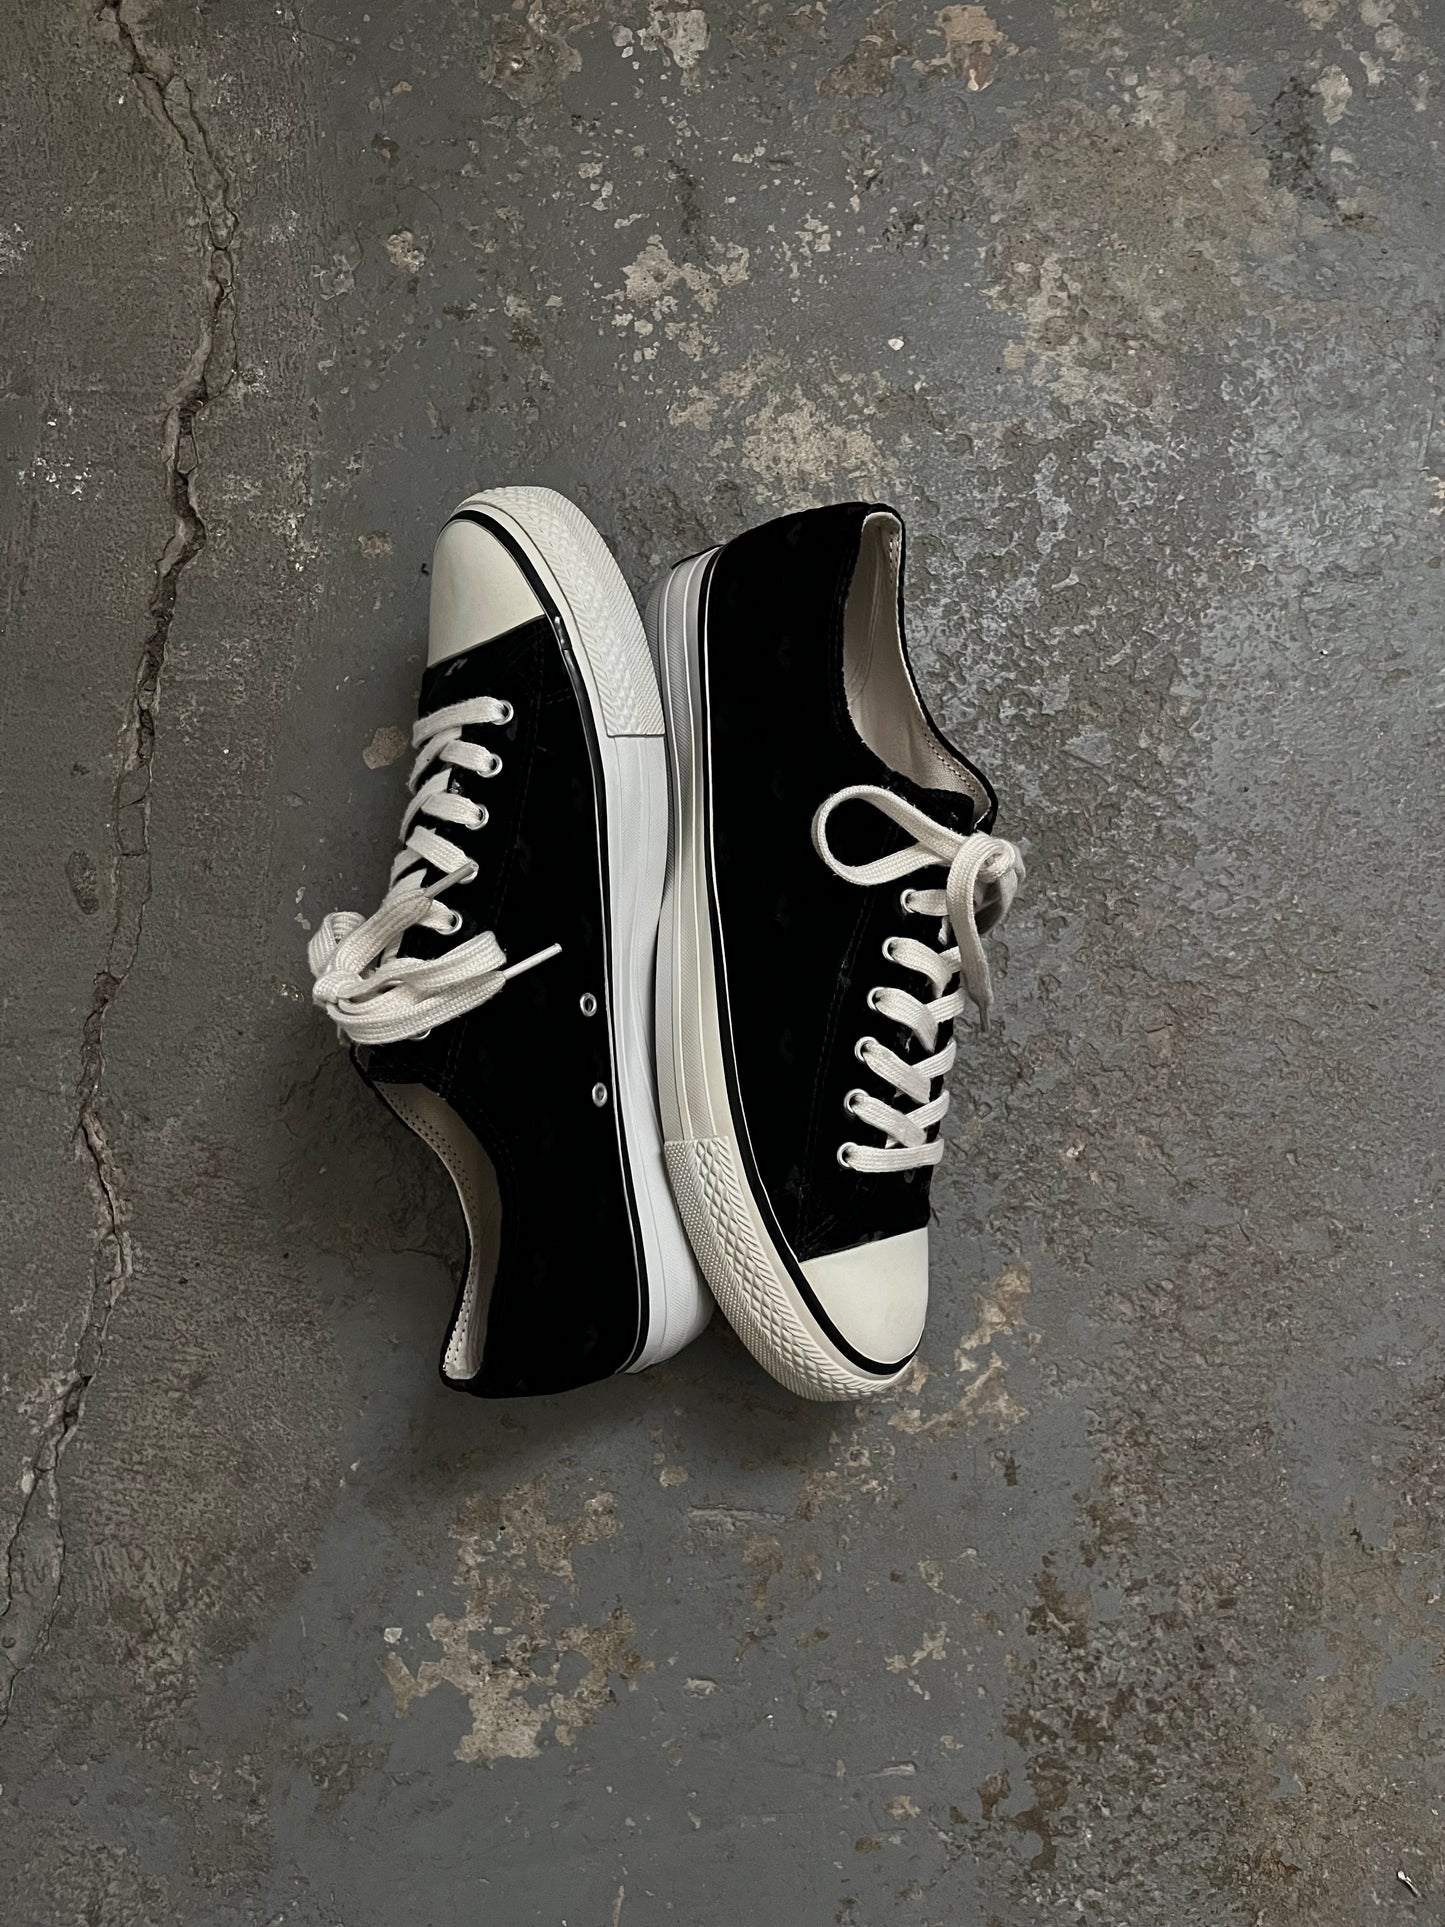 Undercover AW02 “Witches Cell Division” Bat Velour “chucks”